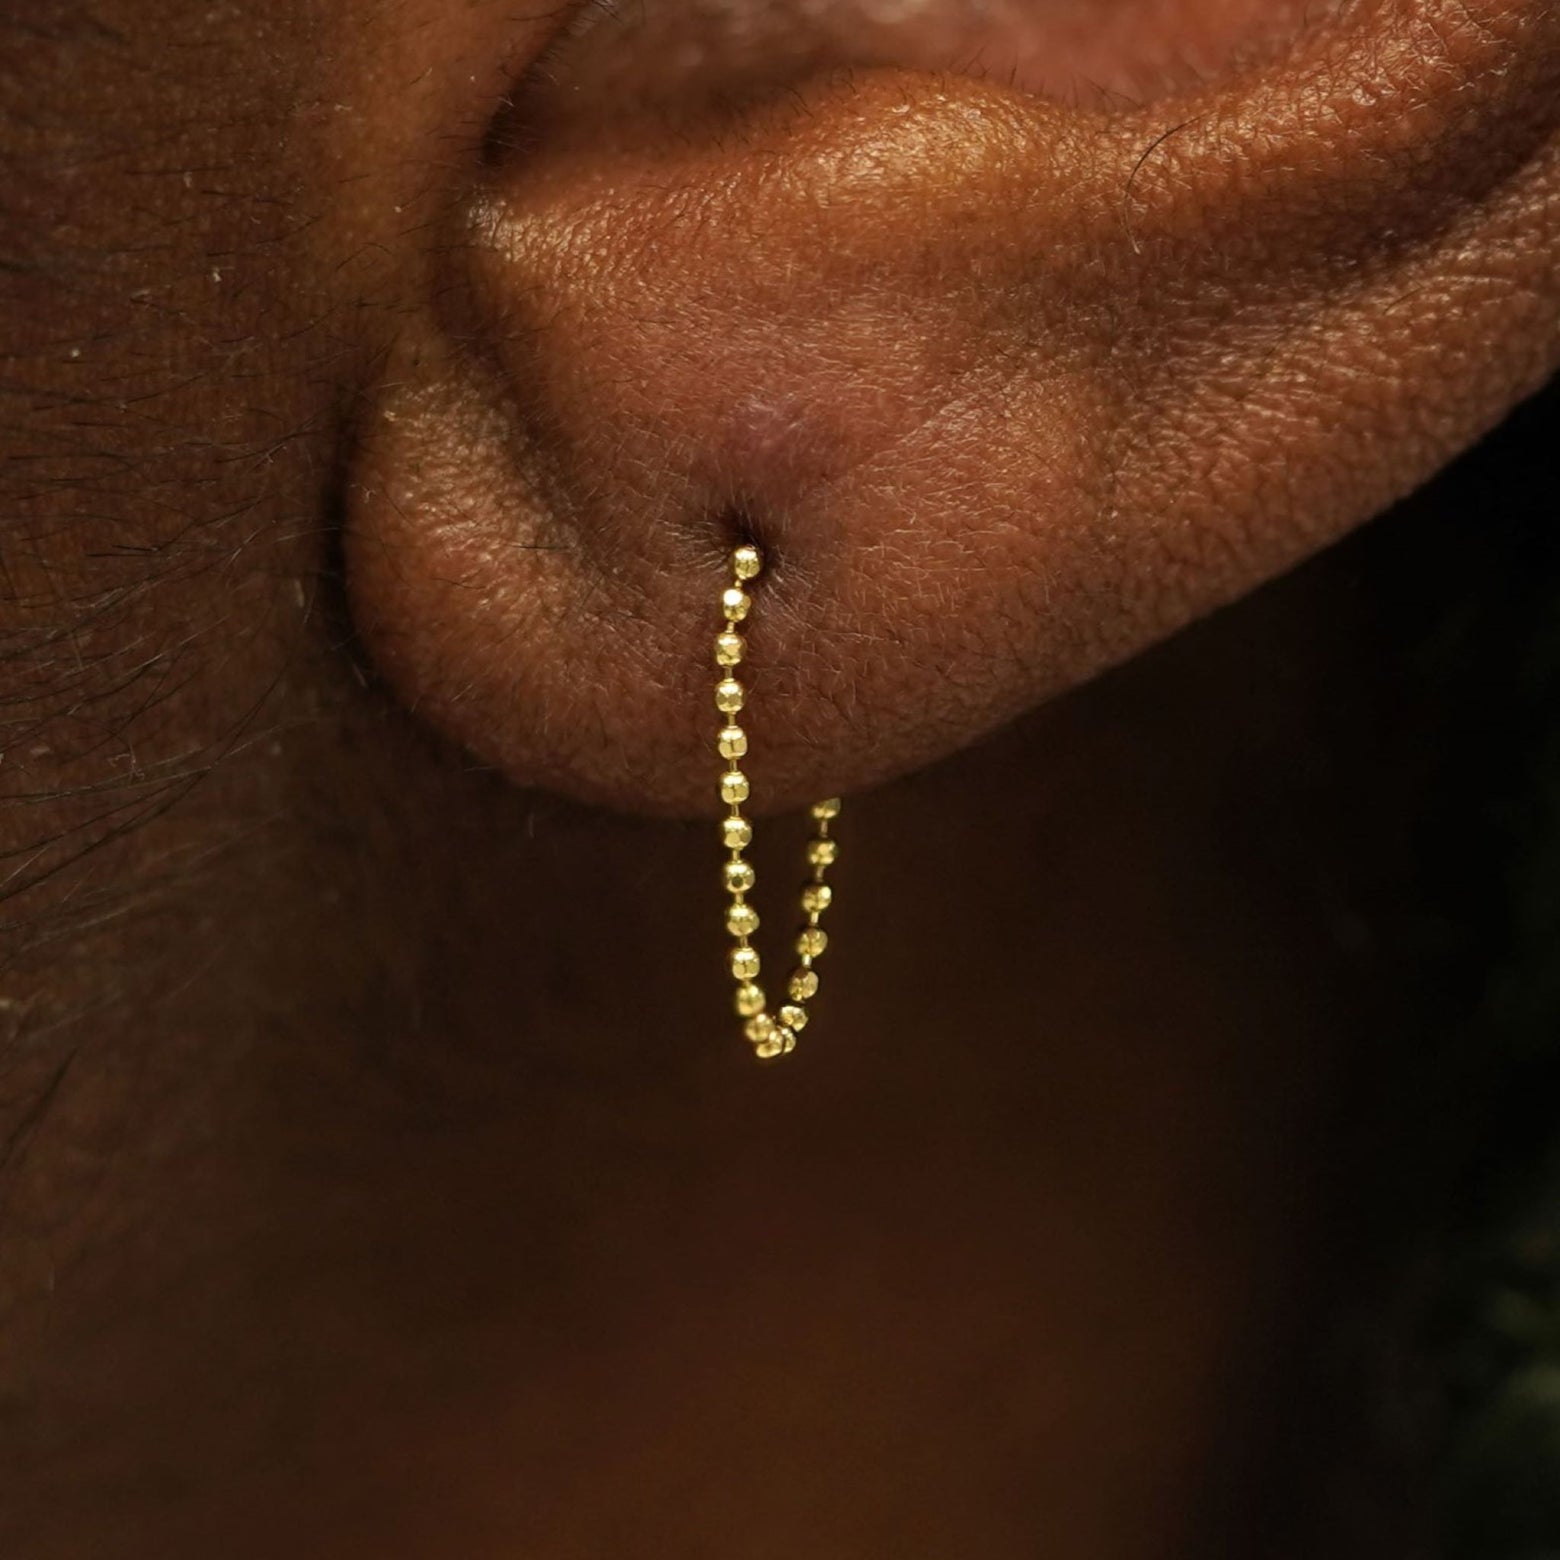 Close up view of a model's wearing a 14k yellow gold Chain Loop Earring